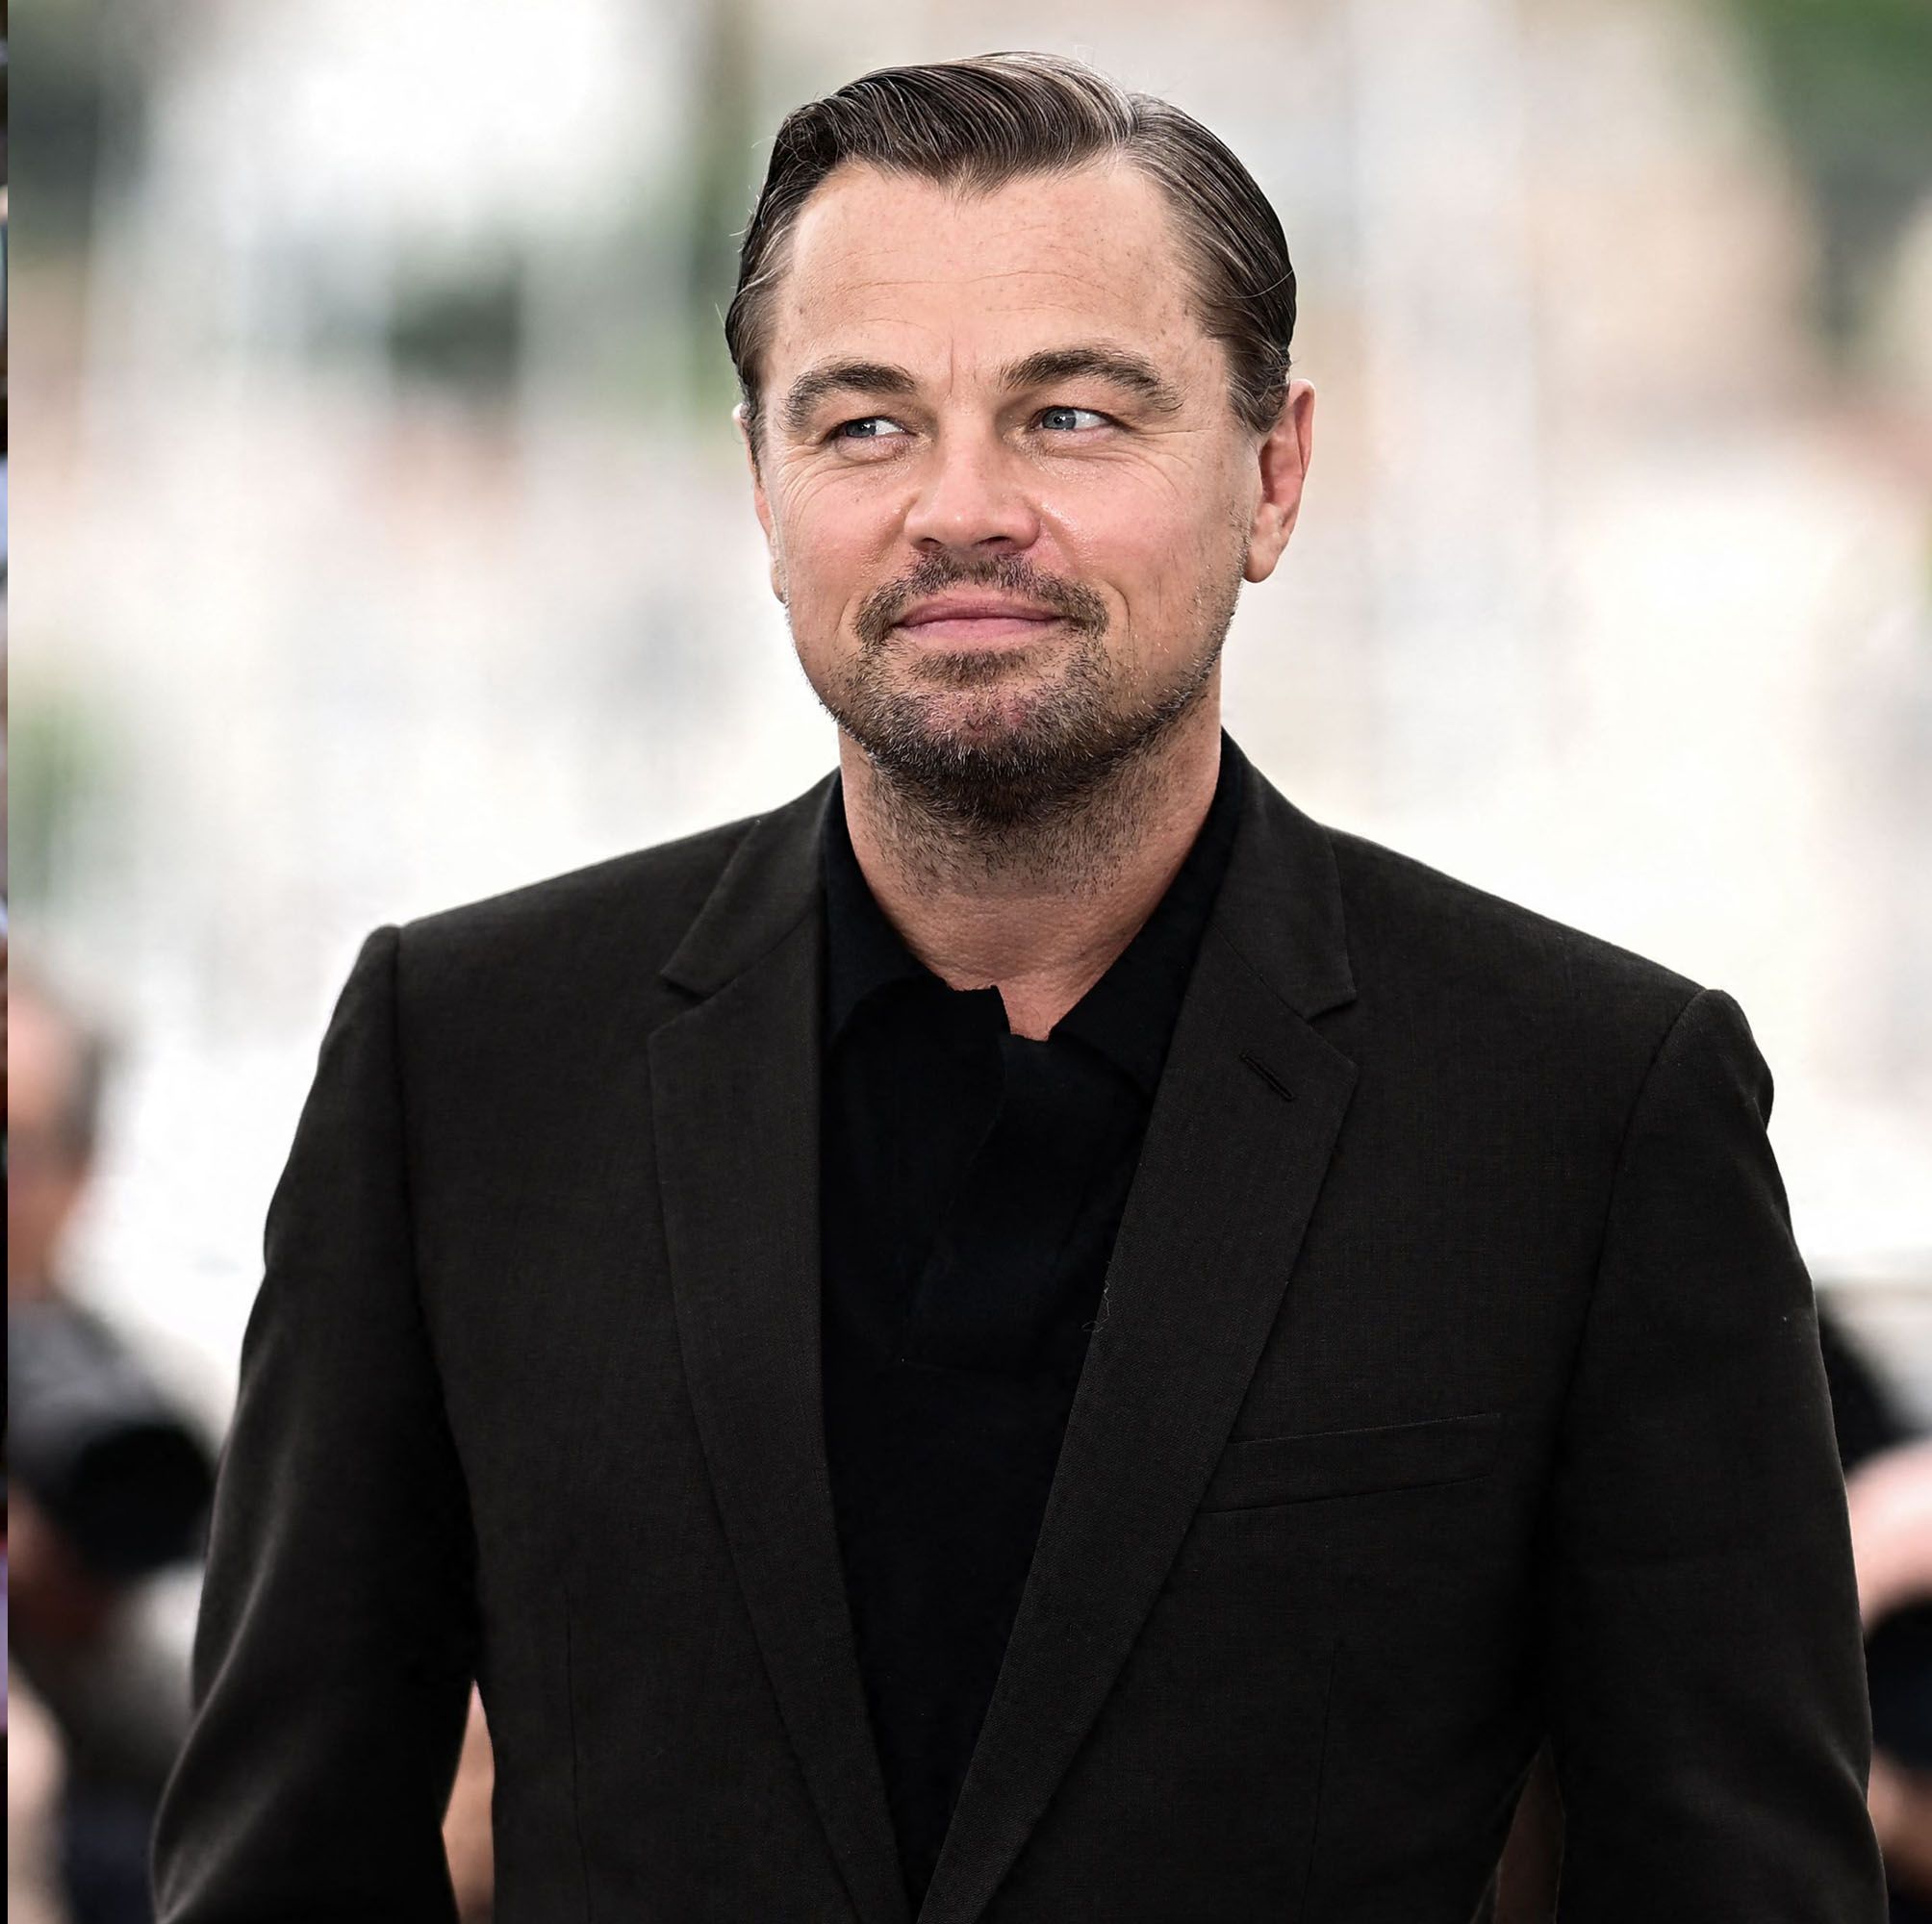 Why Leonardo DiCaprio's Friends Don't Think He'll *Fully* Settle Down With Gigi Hadid